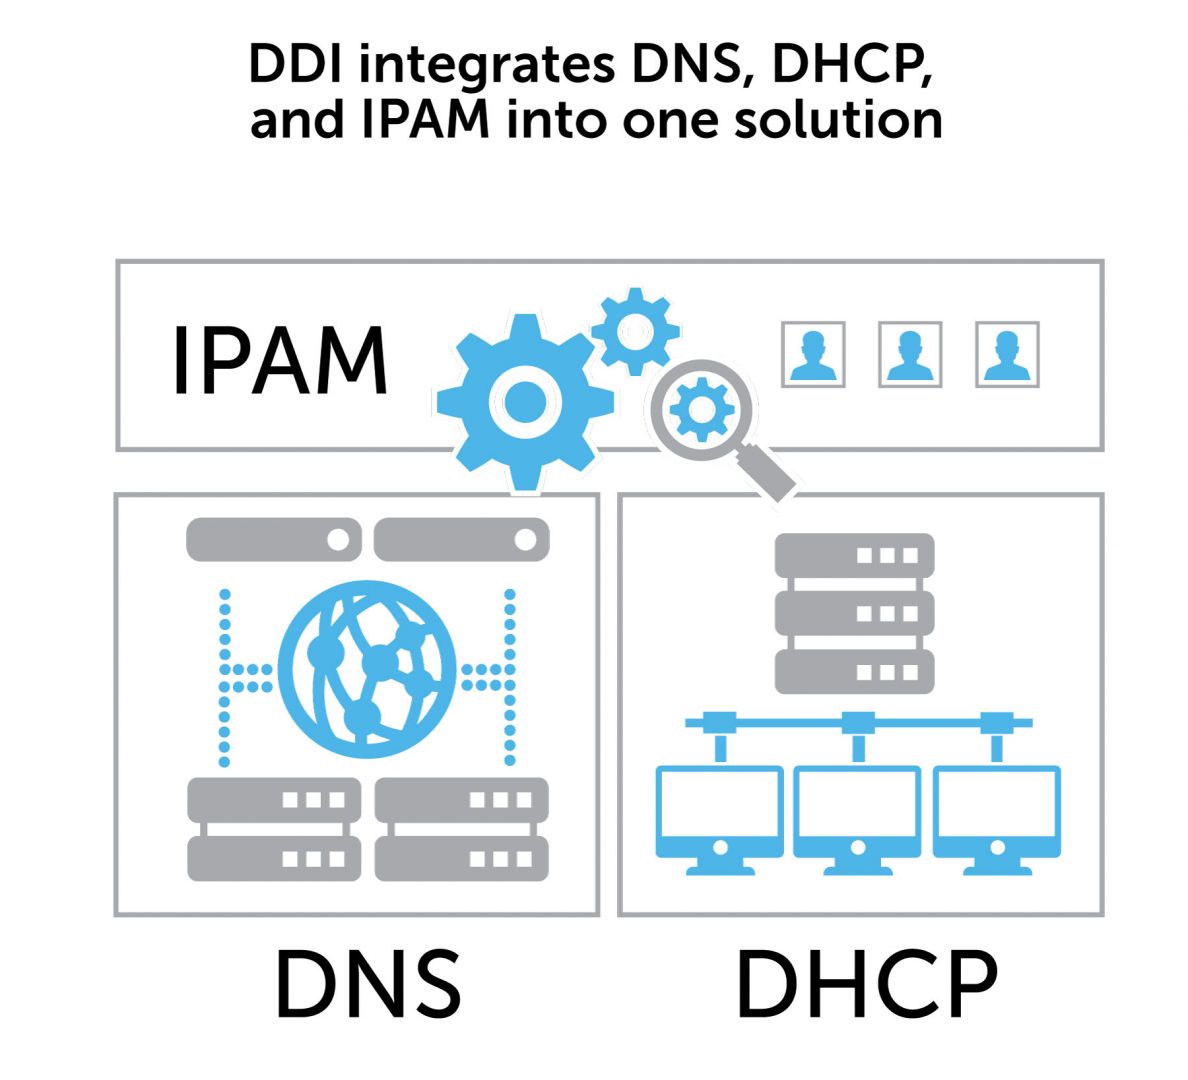 DDI integrates DNS, DHCP, and IPAM into one solution